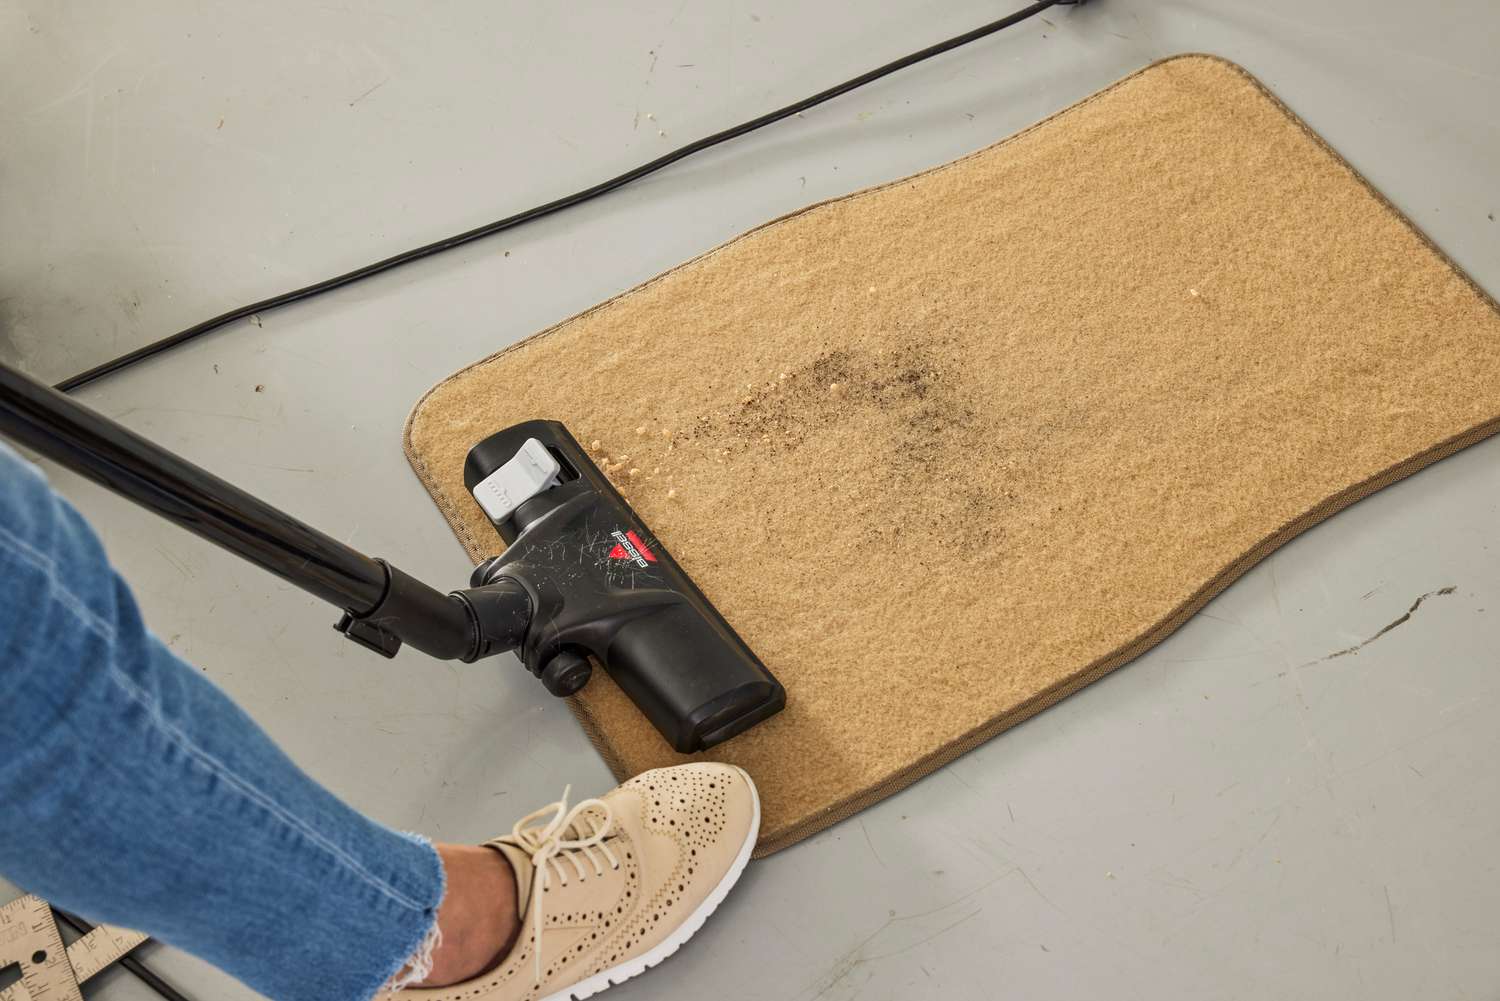 A person vacuums a car mat with the Bissell Zing Bagless Canister Vacuum, 2156A